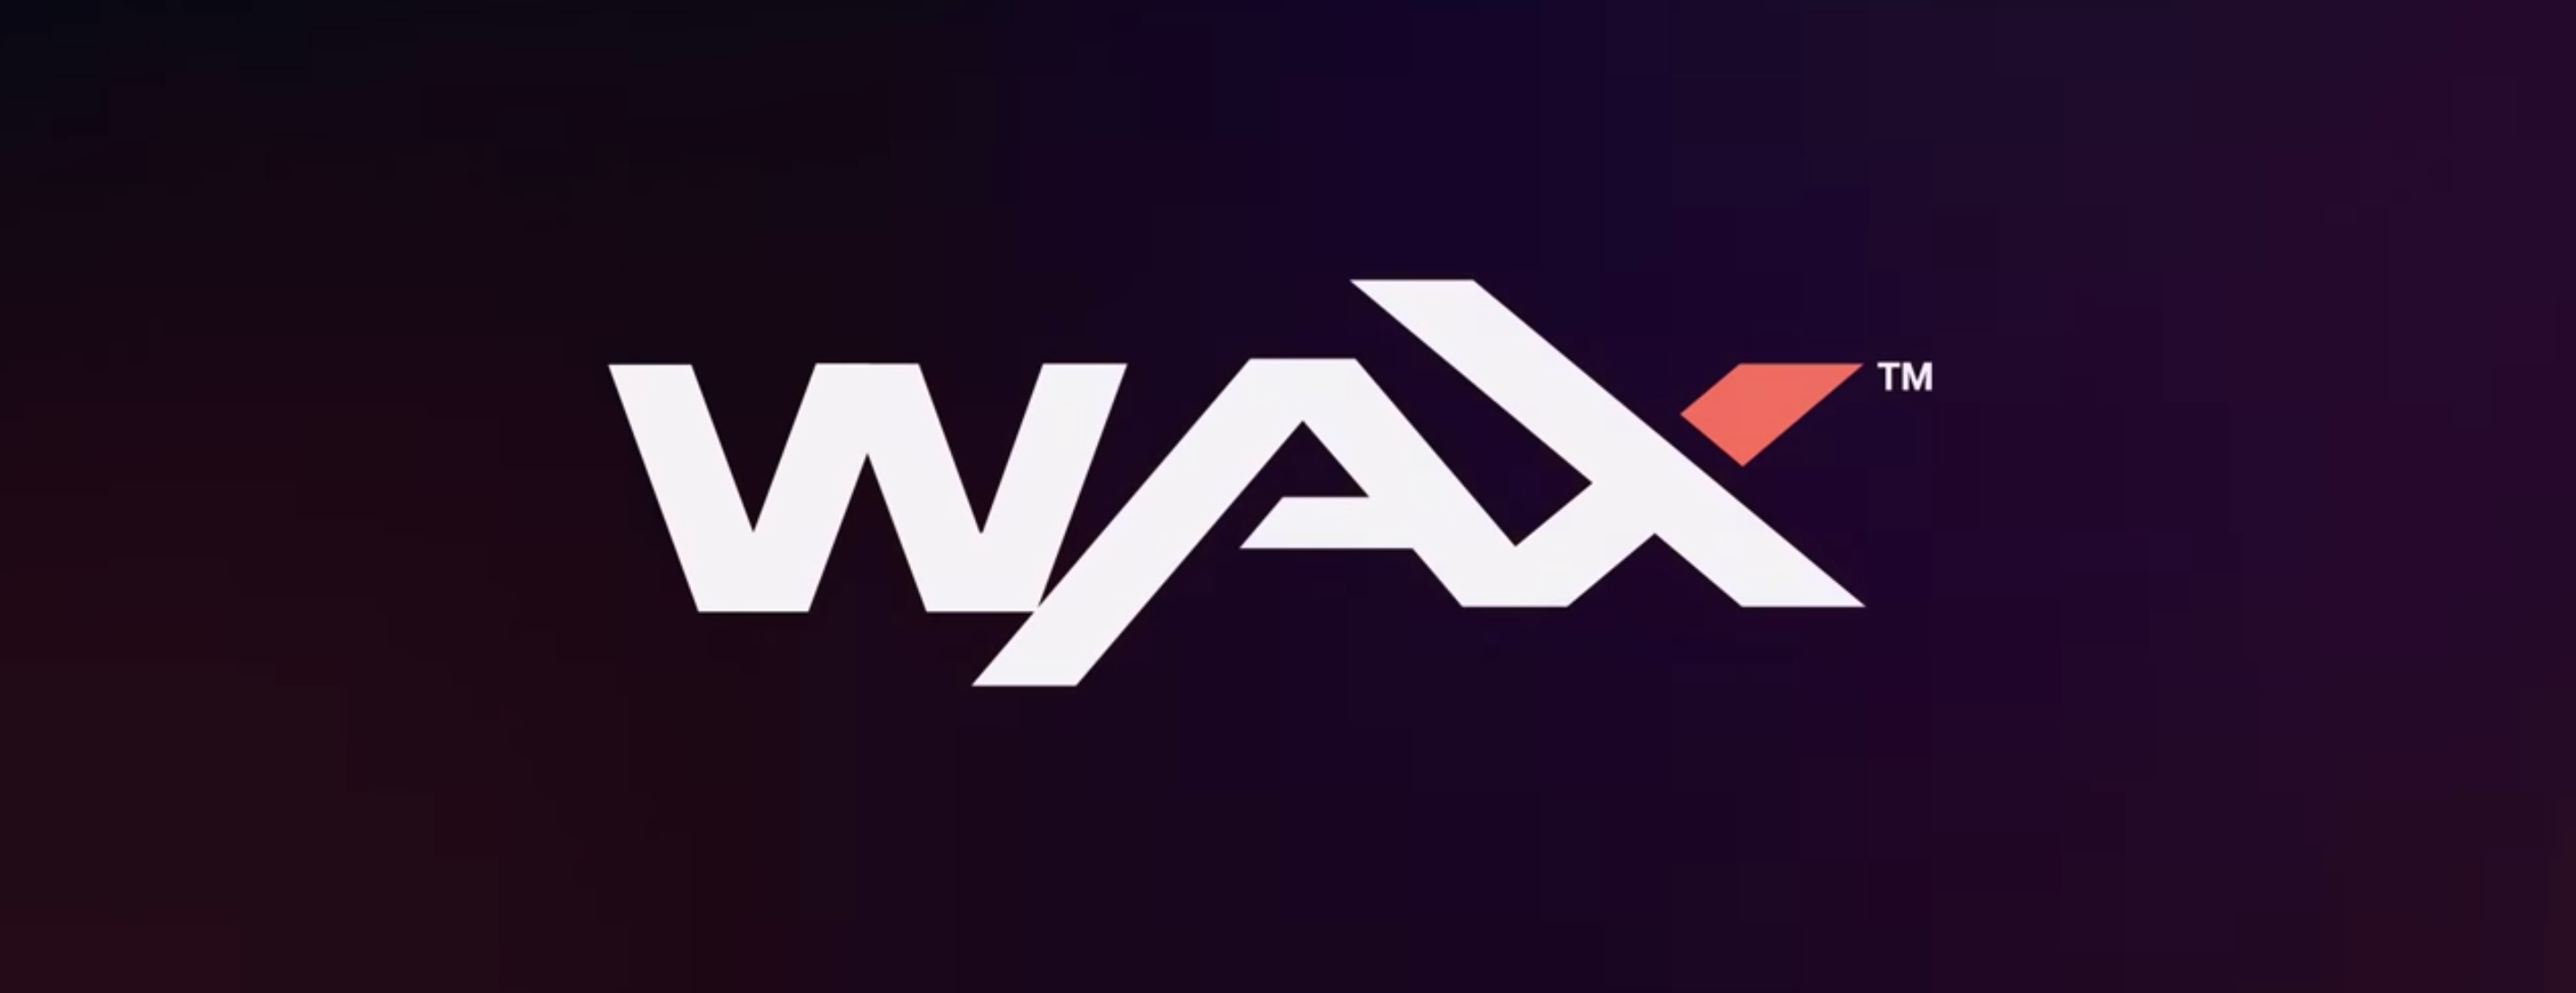 WAX (WAXP) banner in the centre of the page.